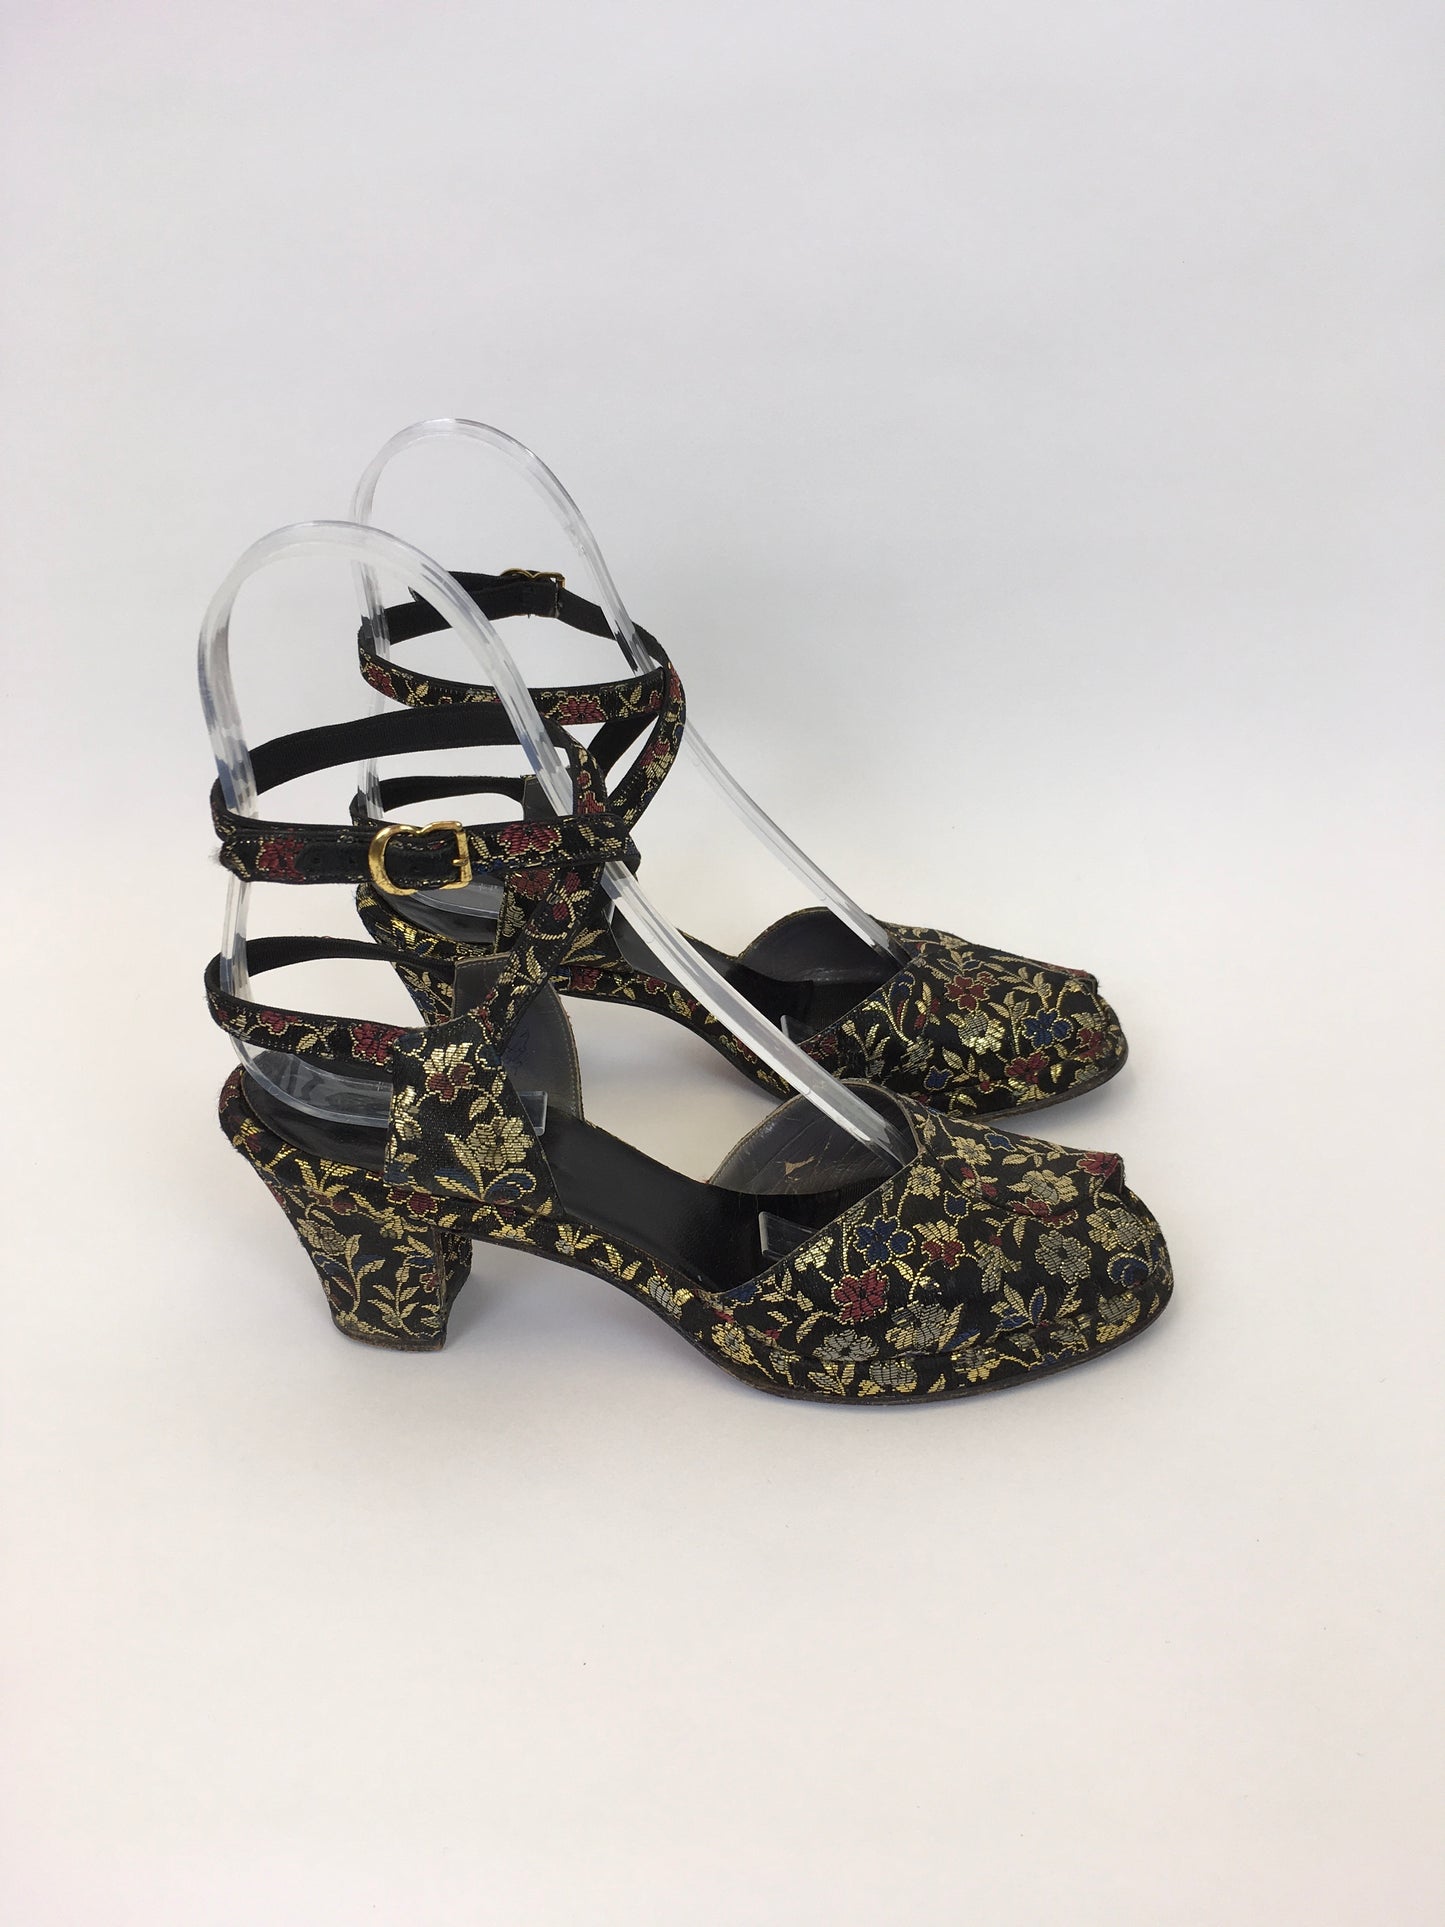 Original 1940s Heeled Sandals In A Beautiful Floral Brocade - Made by The Fabulous ‘ Colella’ American Label